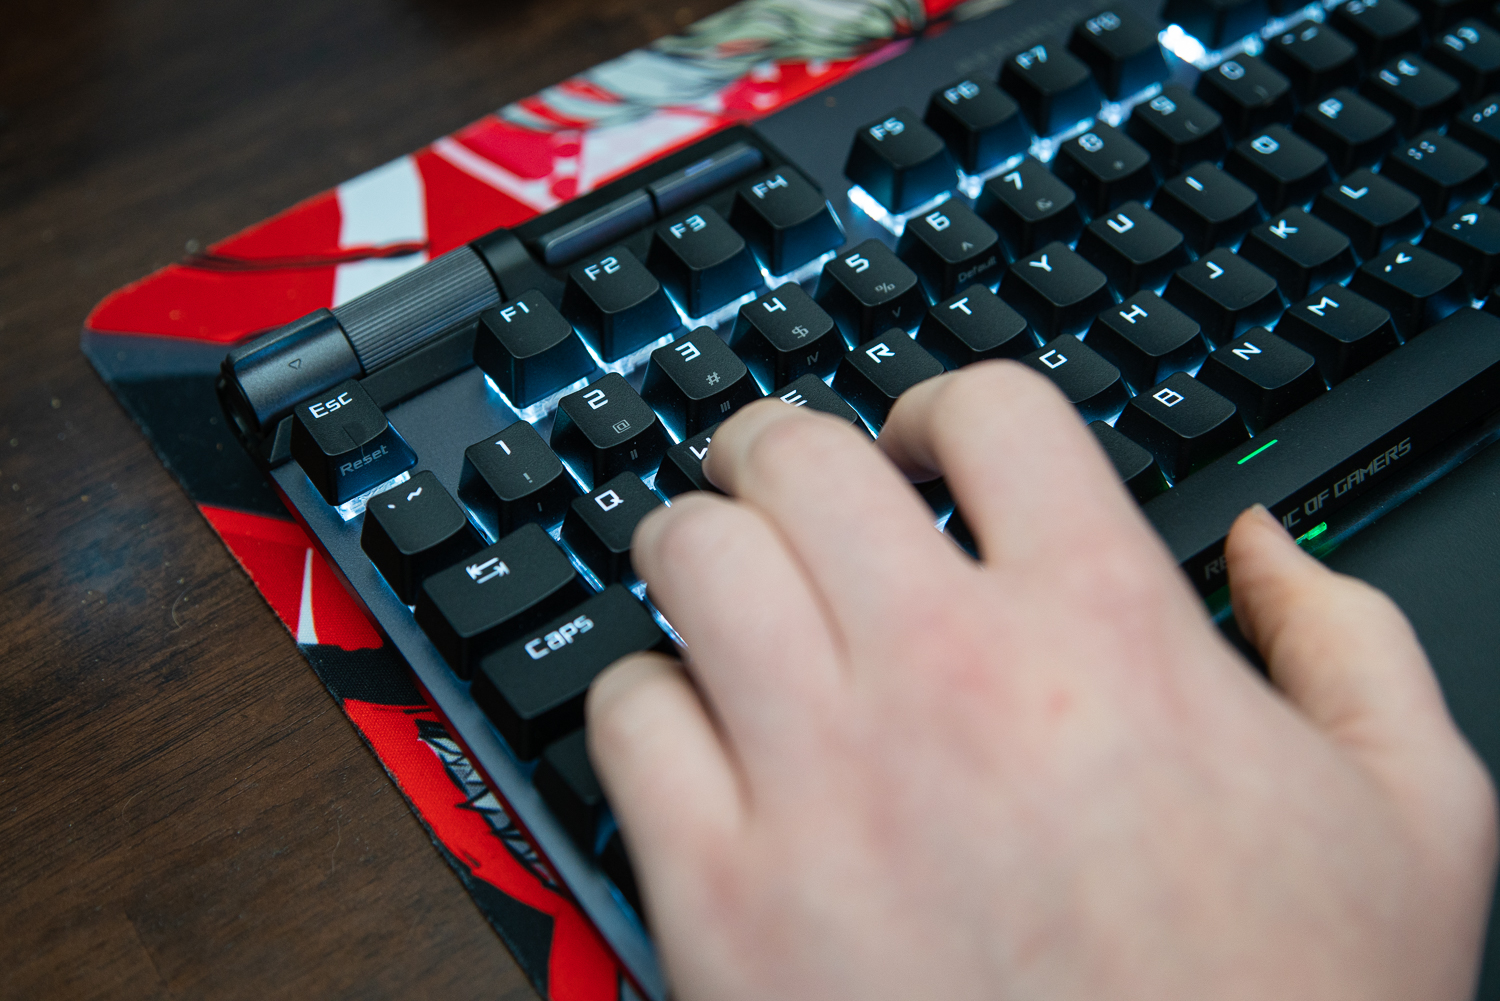 Fingers on WASD on a gaming keyboard.